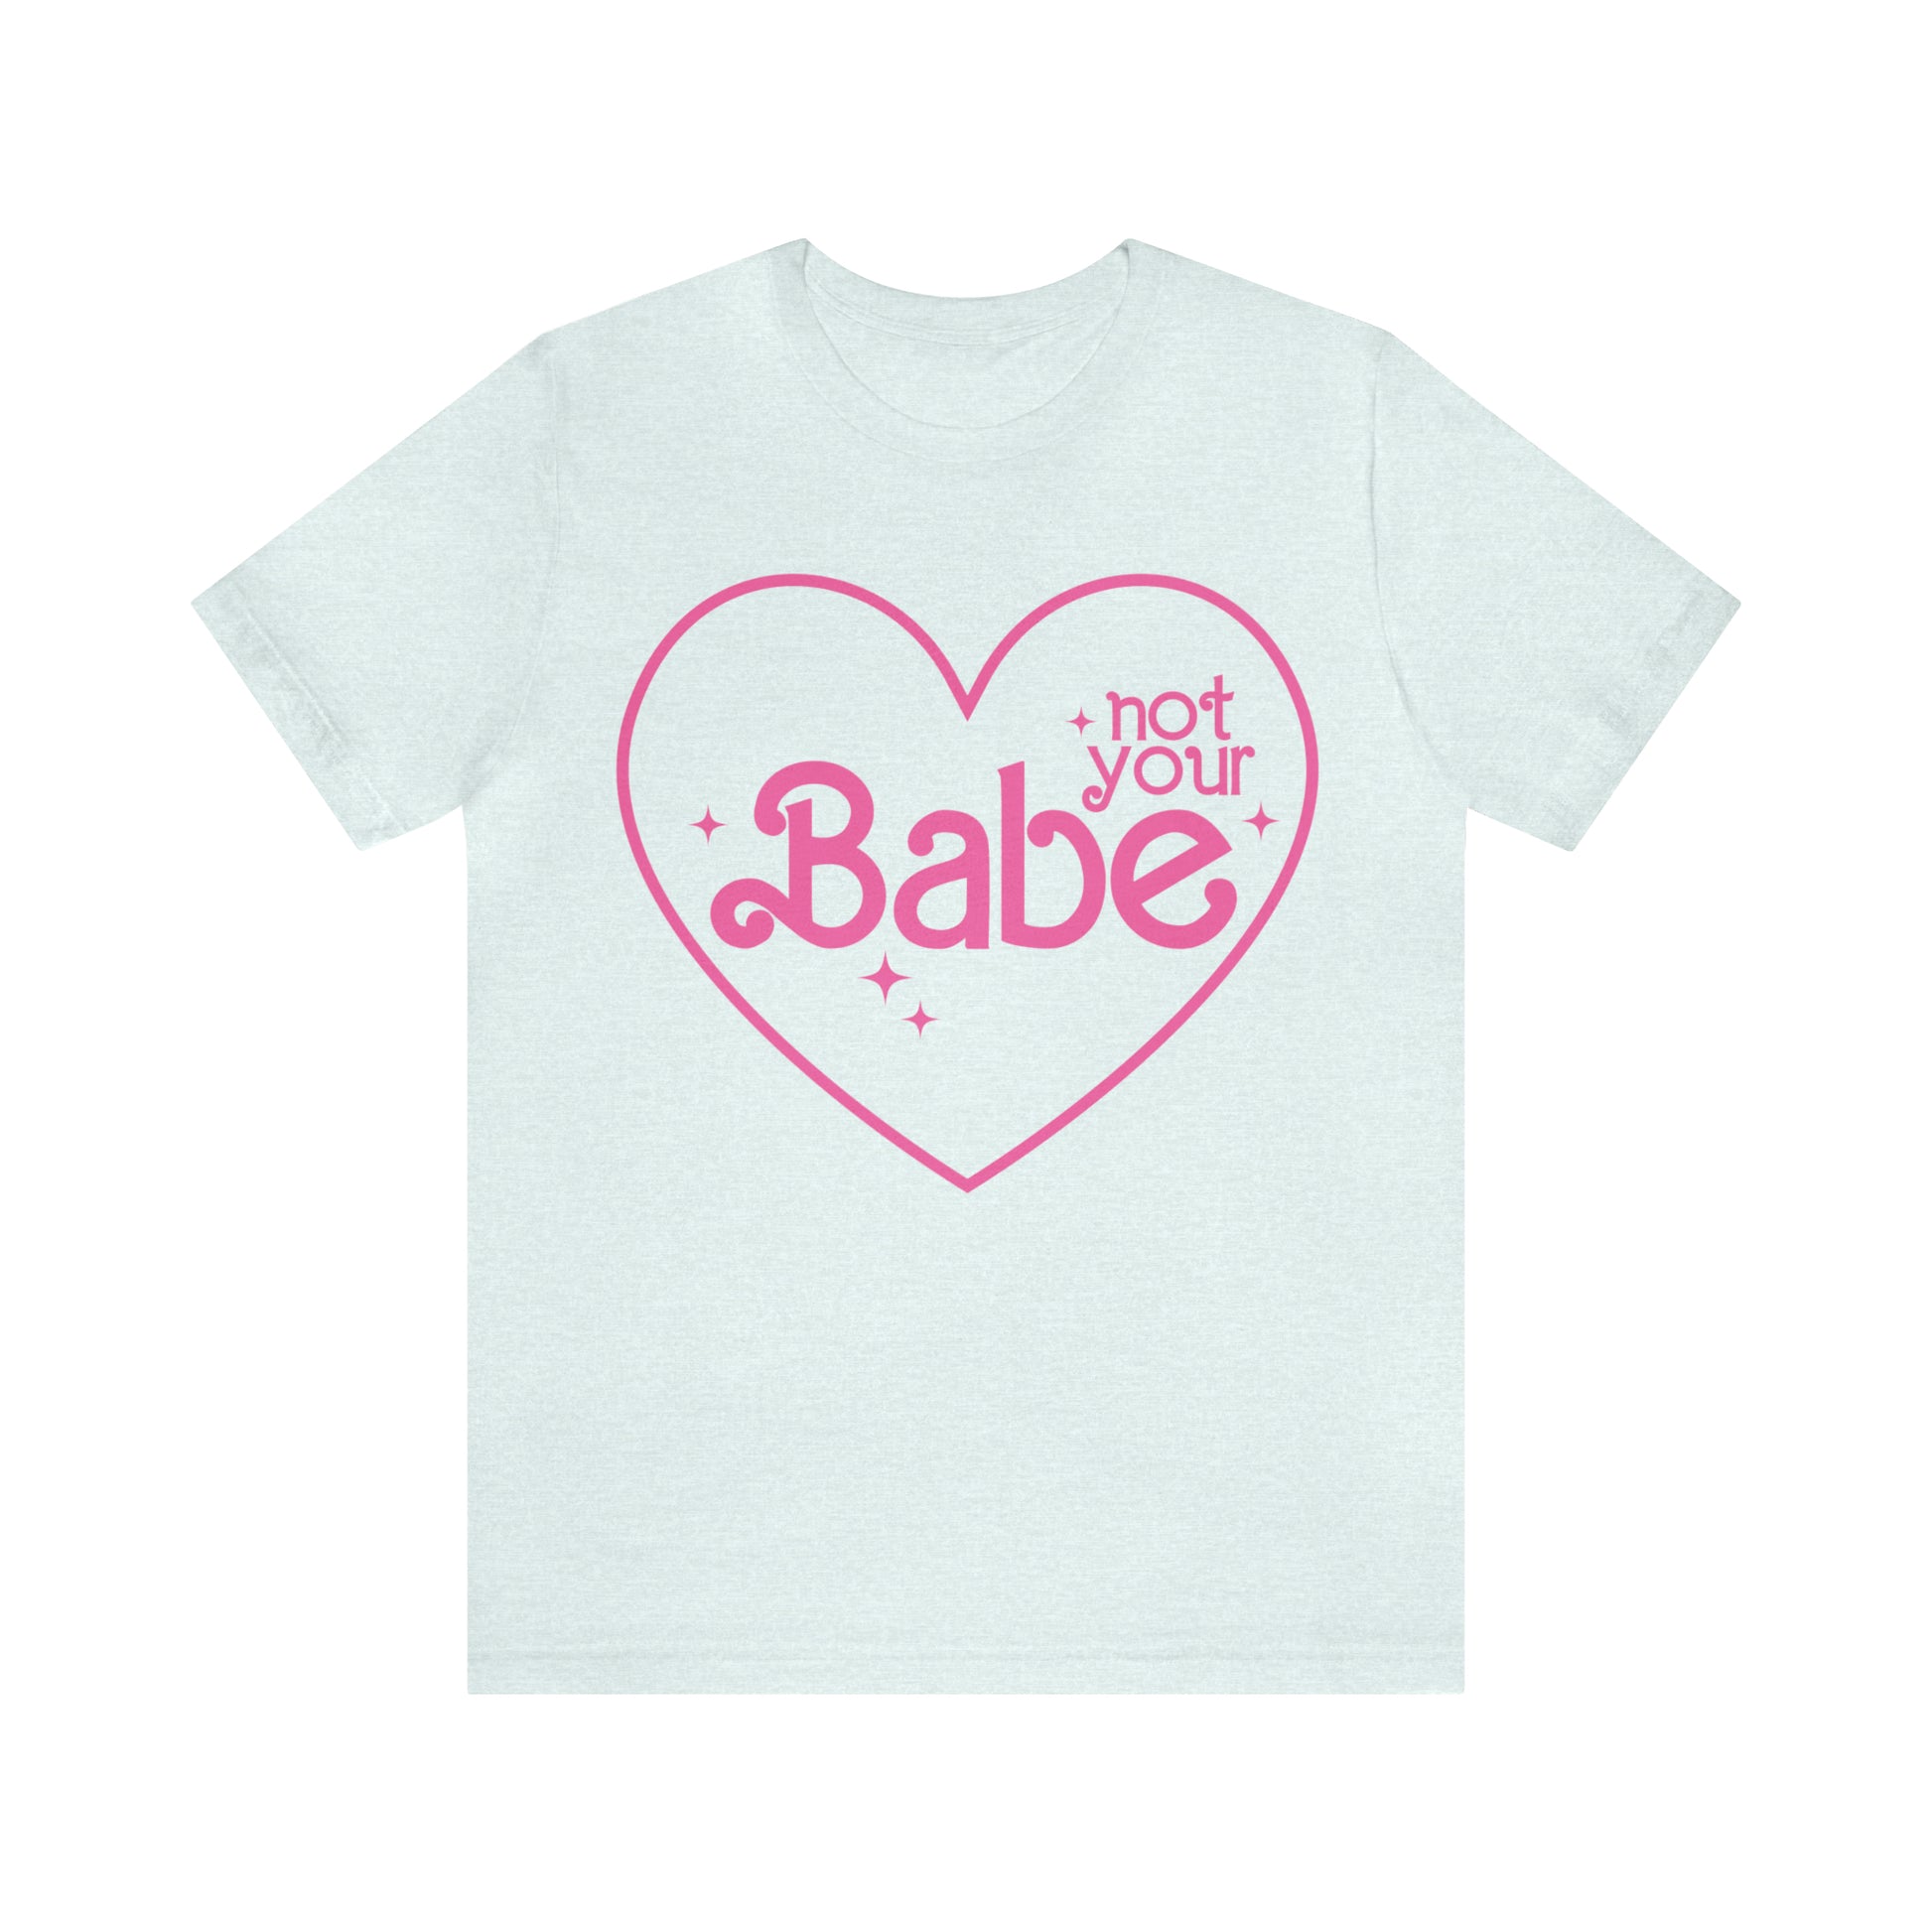 Not Your Babe Funny Sarcastic Shirt for Girls